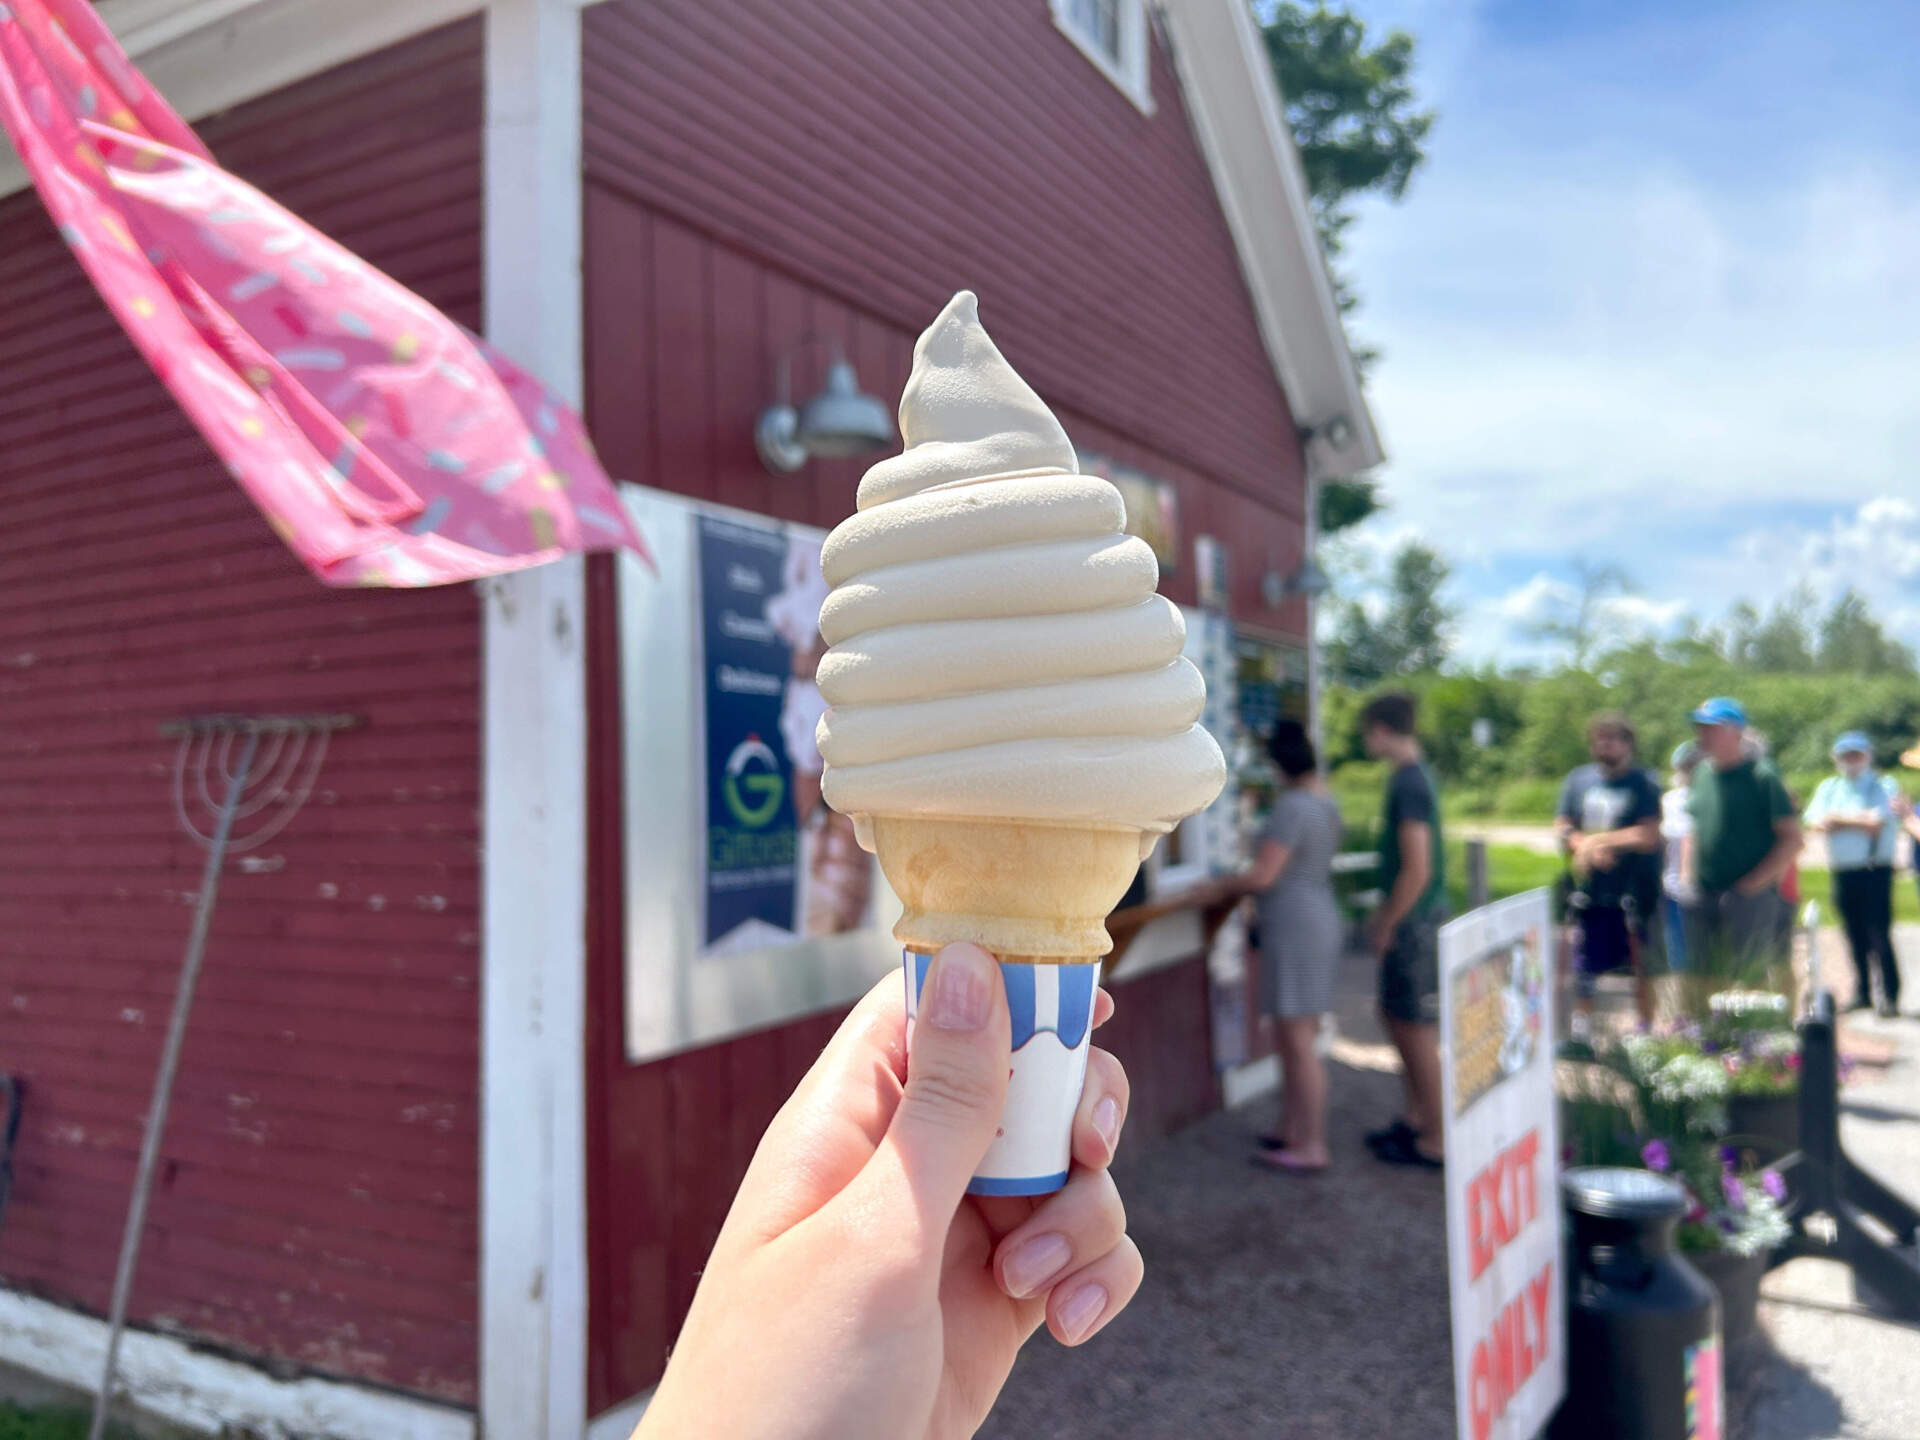 A small maple creemee in a cone from Sweet Scoops off Route 15 in Essex Junction on June 26. (Sophie Stevens/Vermont Public)